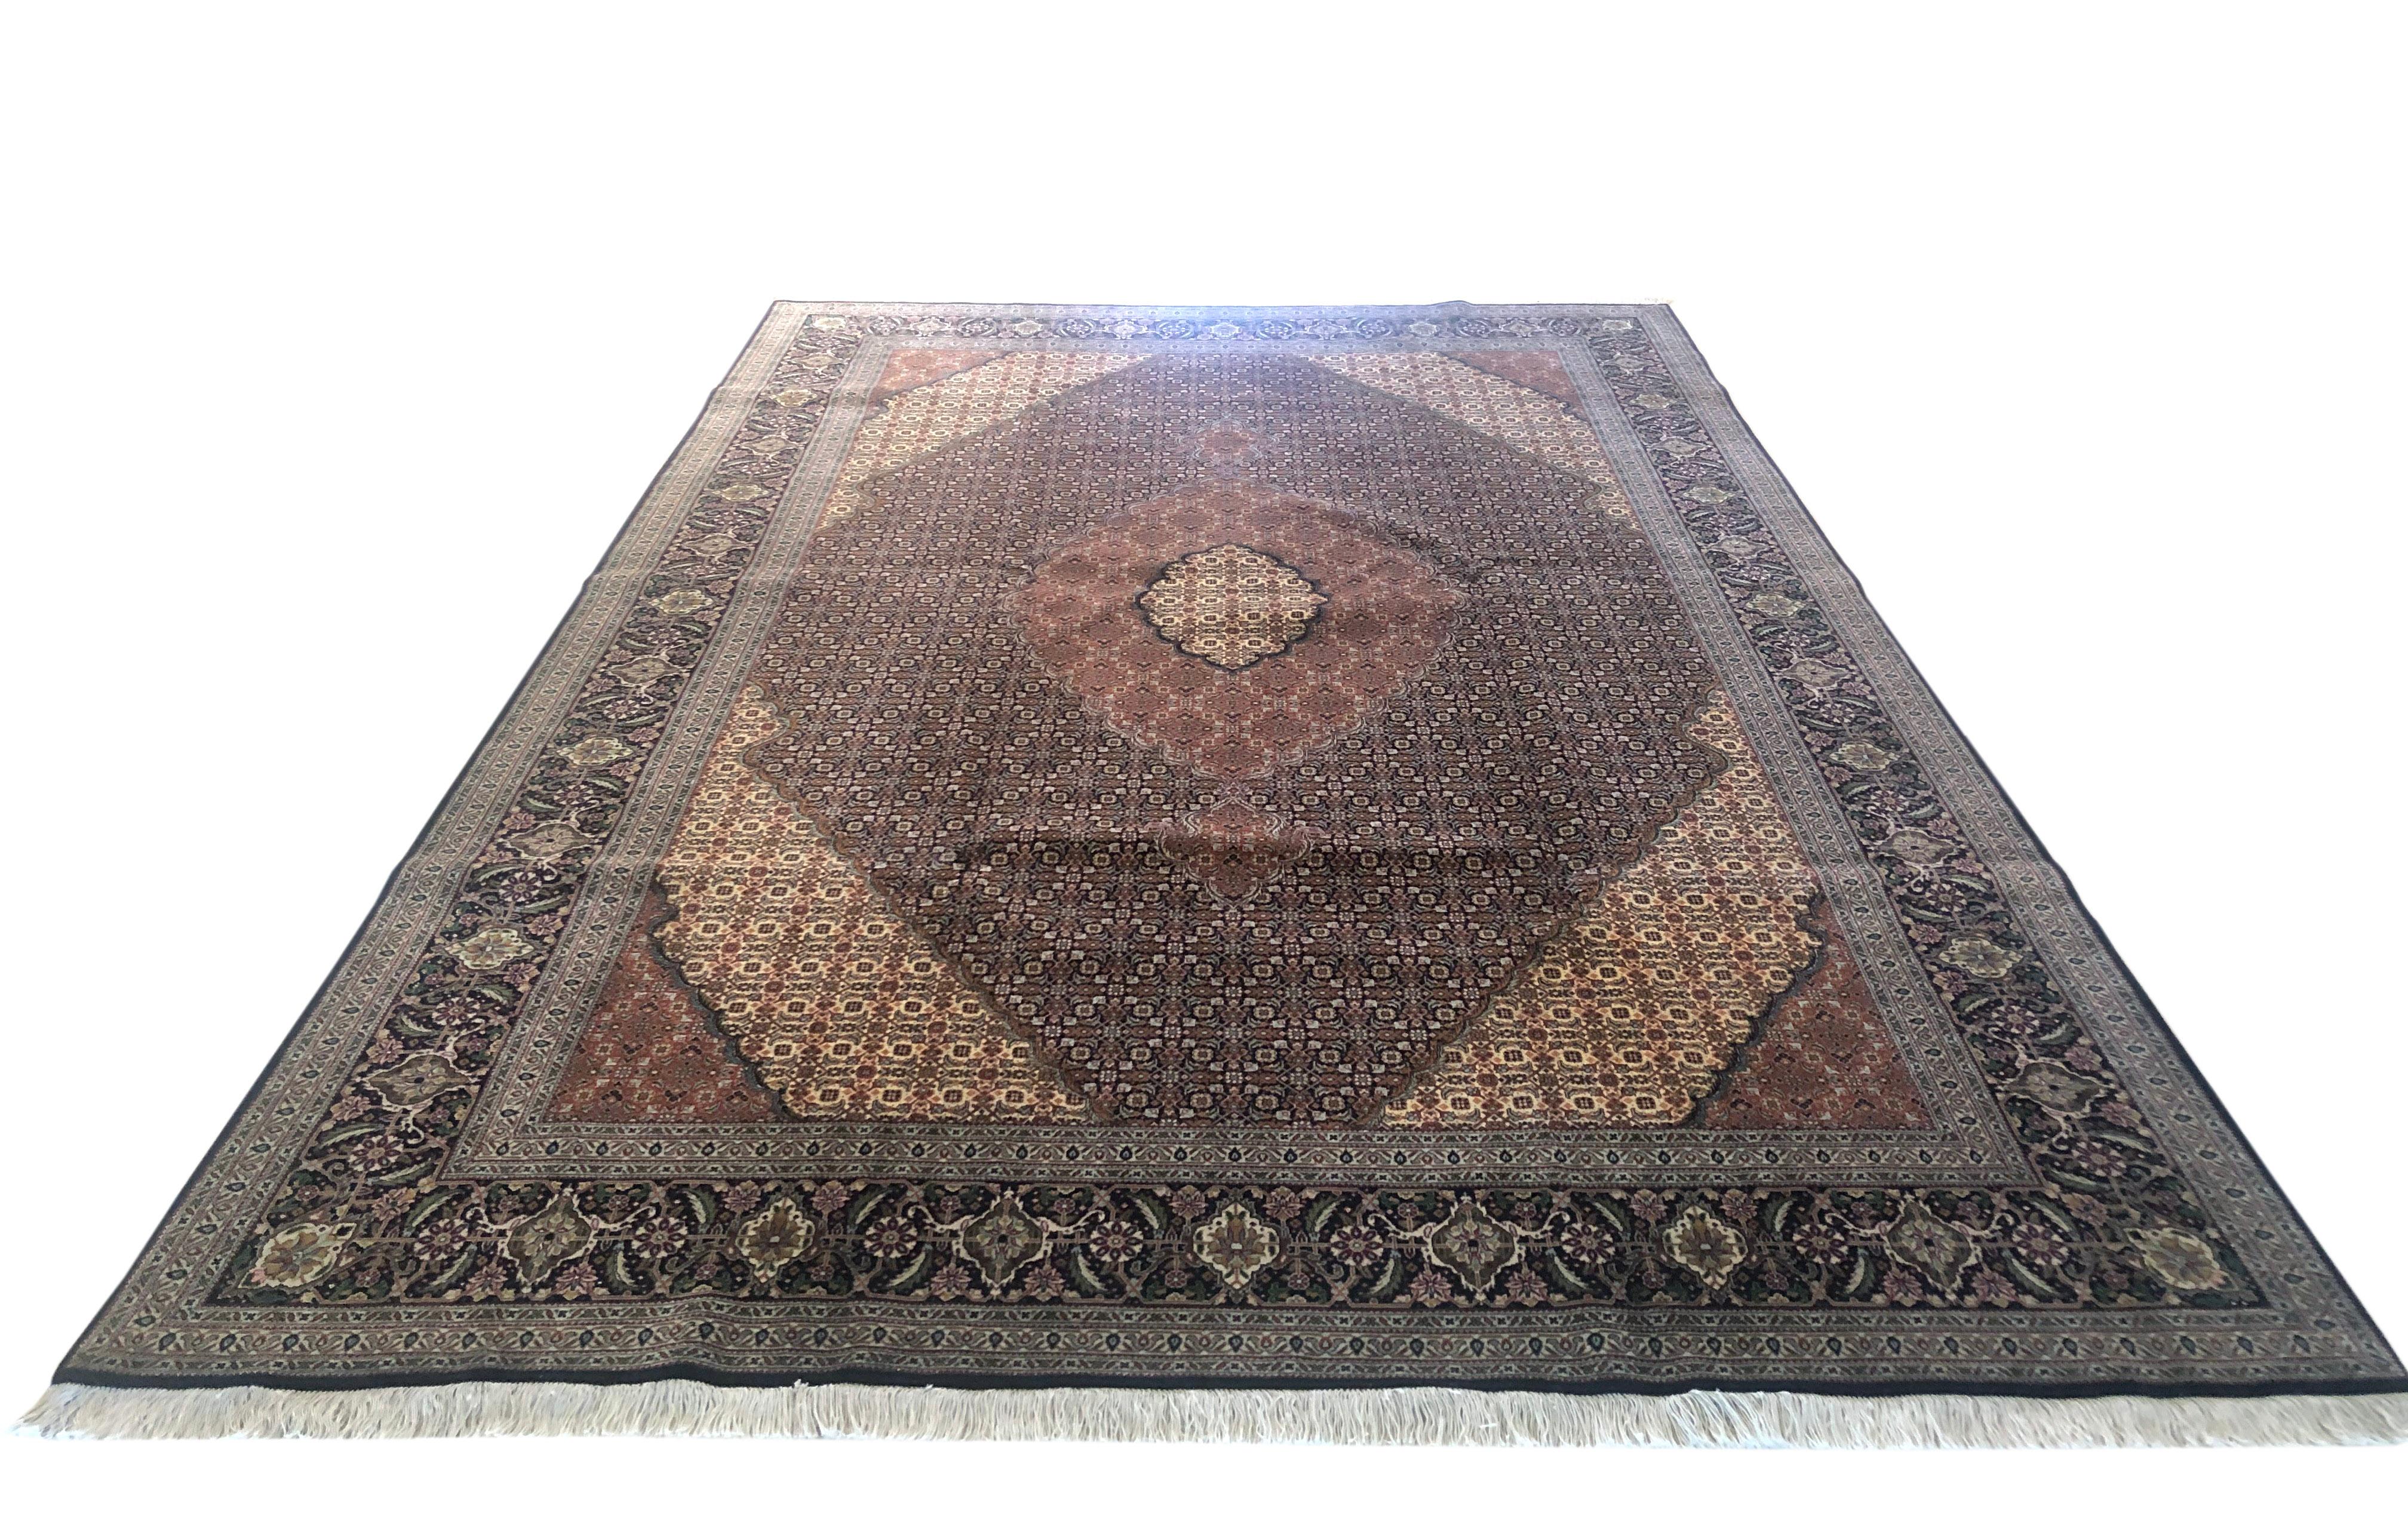 Tabriz rugs are well known for their excellent weaving and design. One of the very famous patterns of Tabriz rugs are Fish Design known is Mahi. This beautiful piece has wool and silk pile with cotton foundation. This is an 1970s 50 “RAJ” consistent